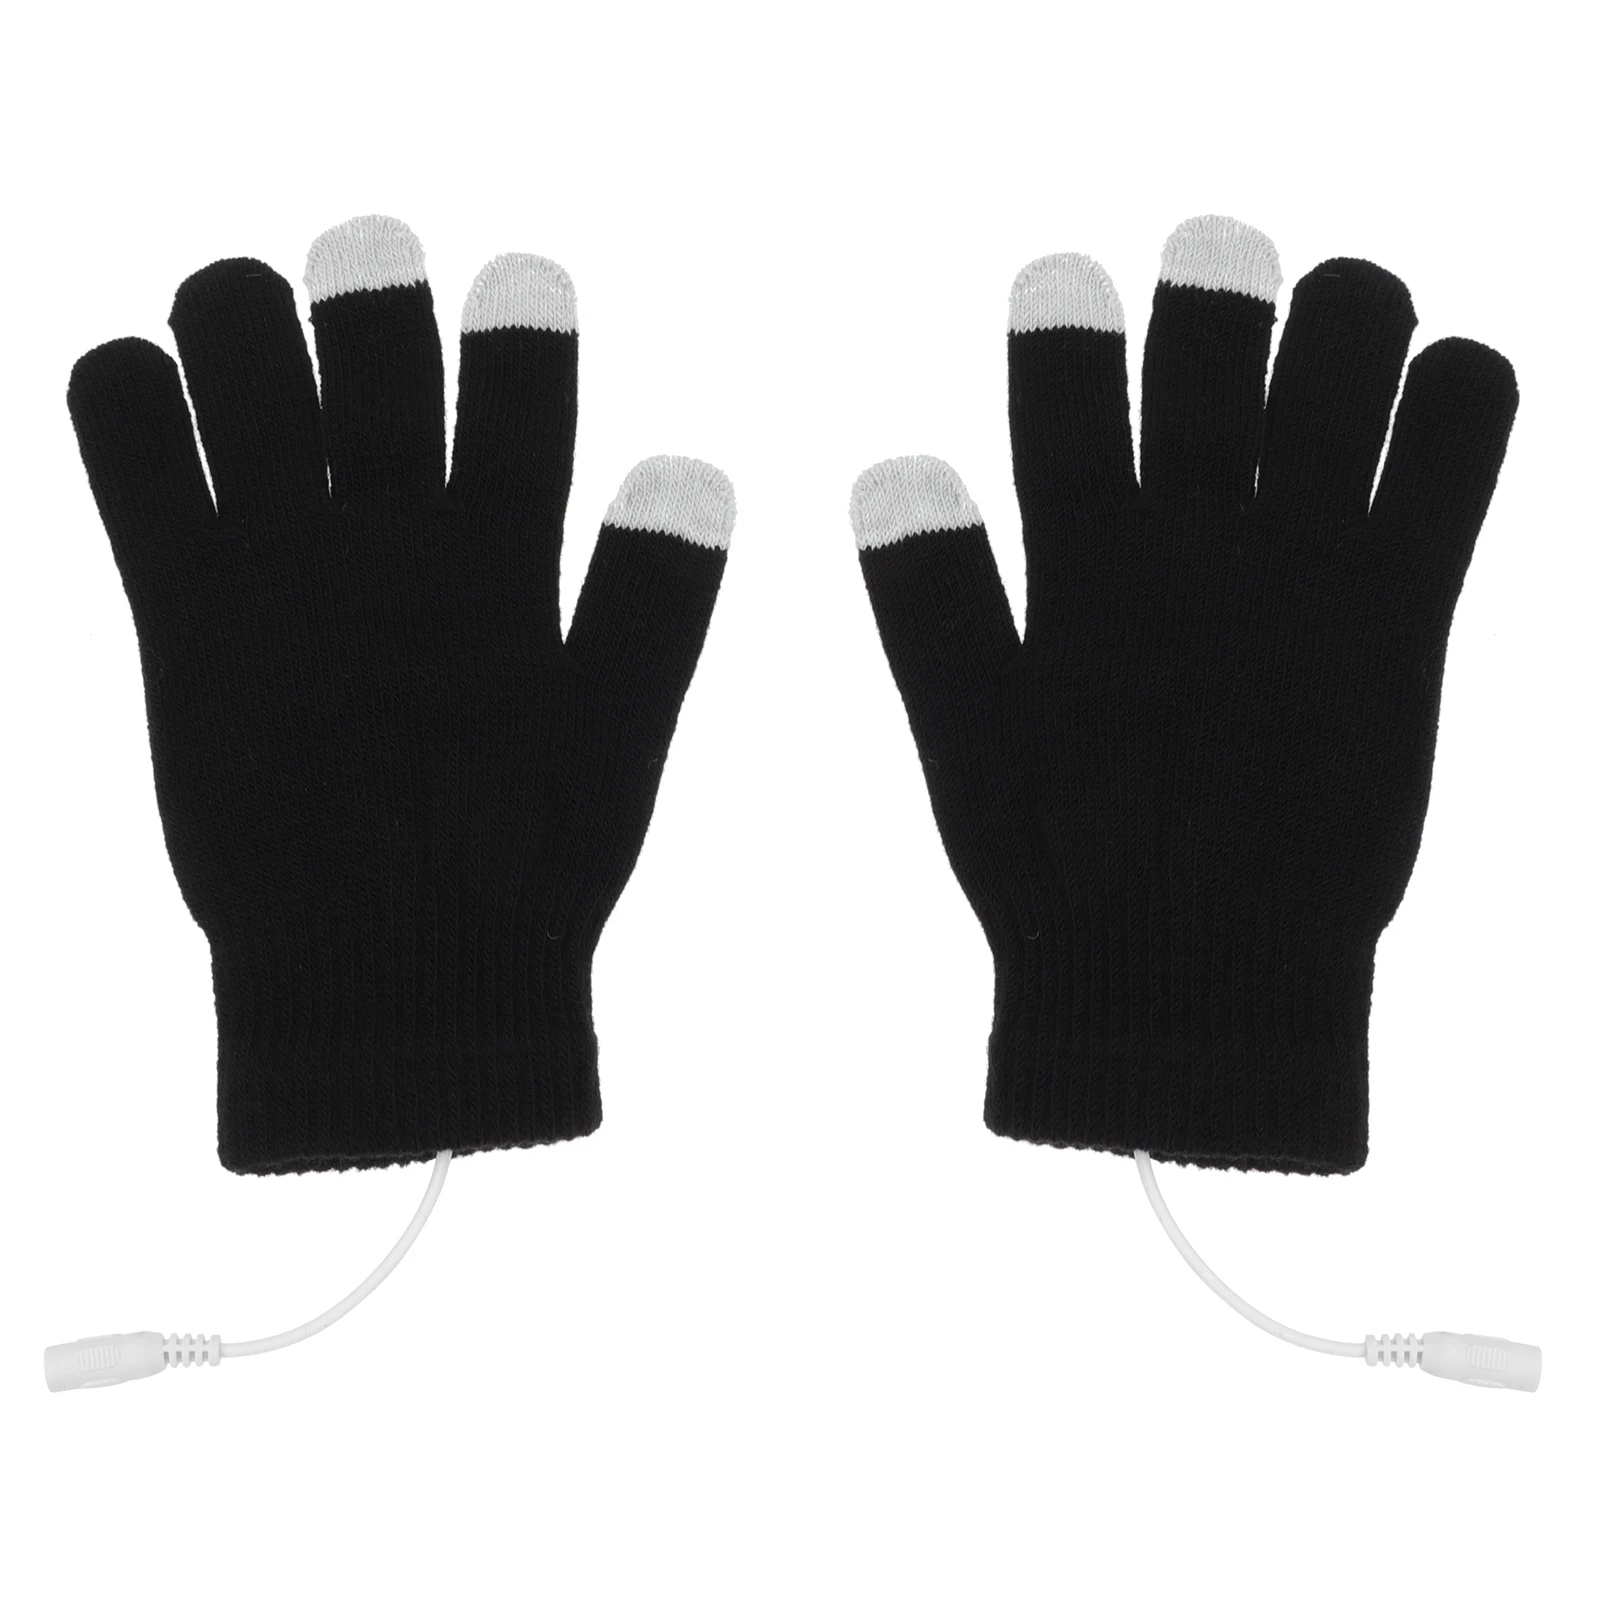 Heating Gloves USB Heated Touch Screen Mittens Cotton Gloves Unisex Winter Typing Touch Screen Cold Protective Hand Gloves